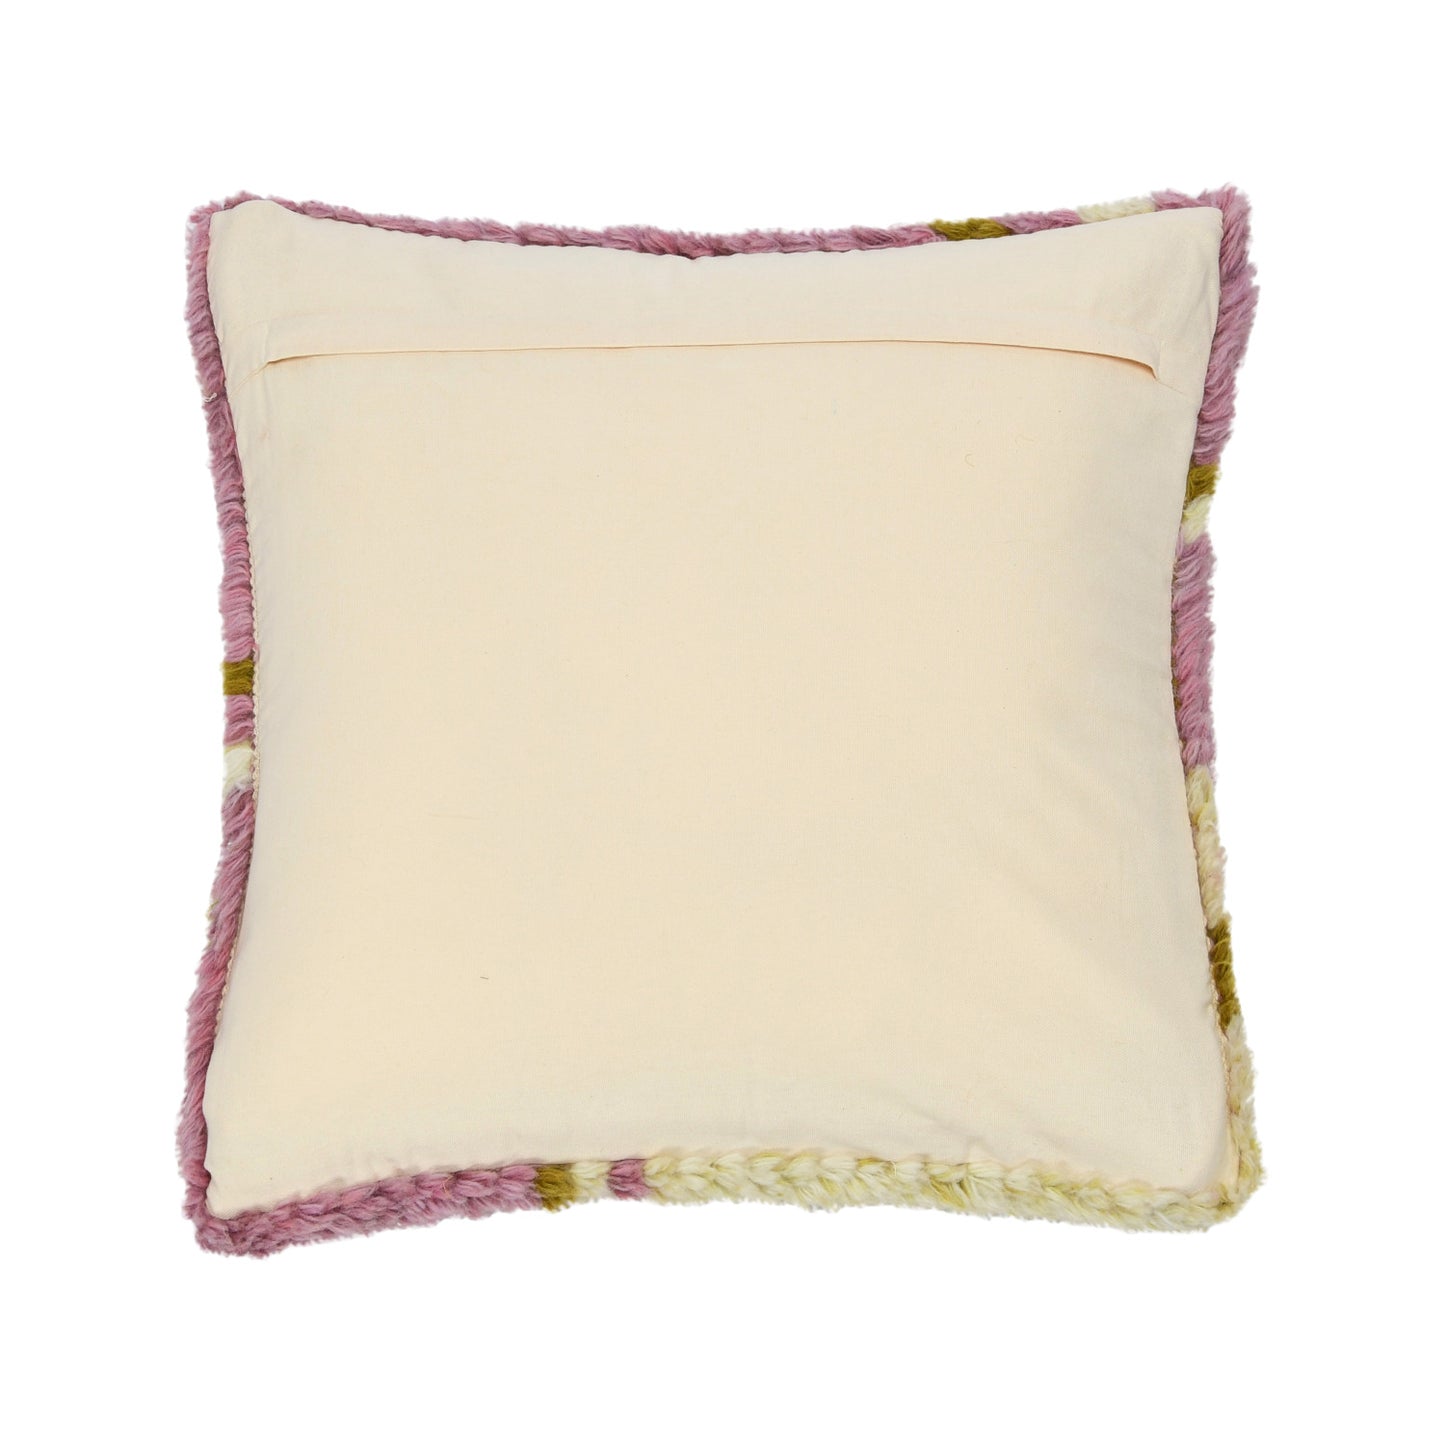 Wool and Cotton Tufted Pillow with Design